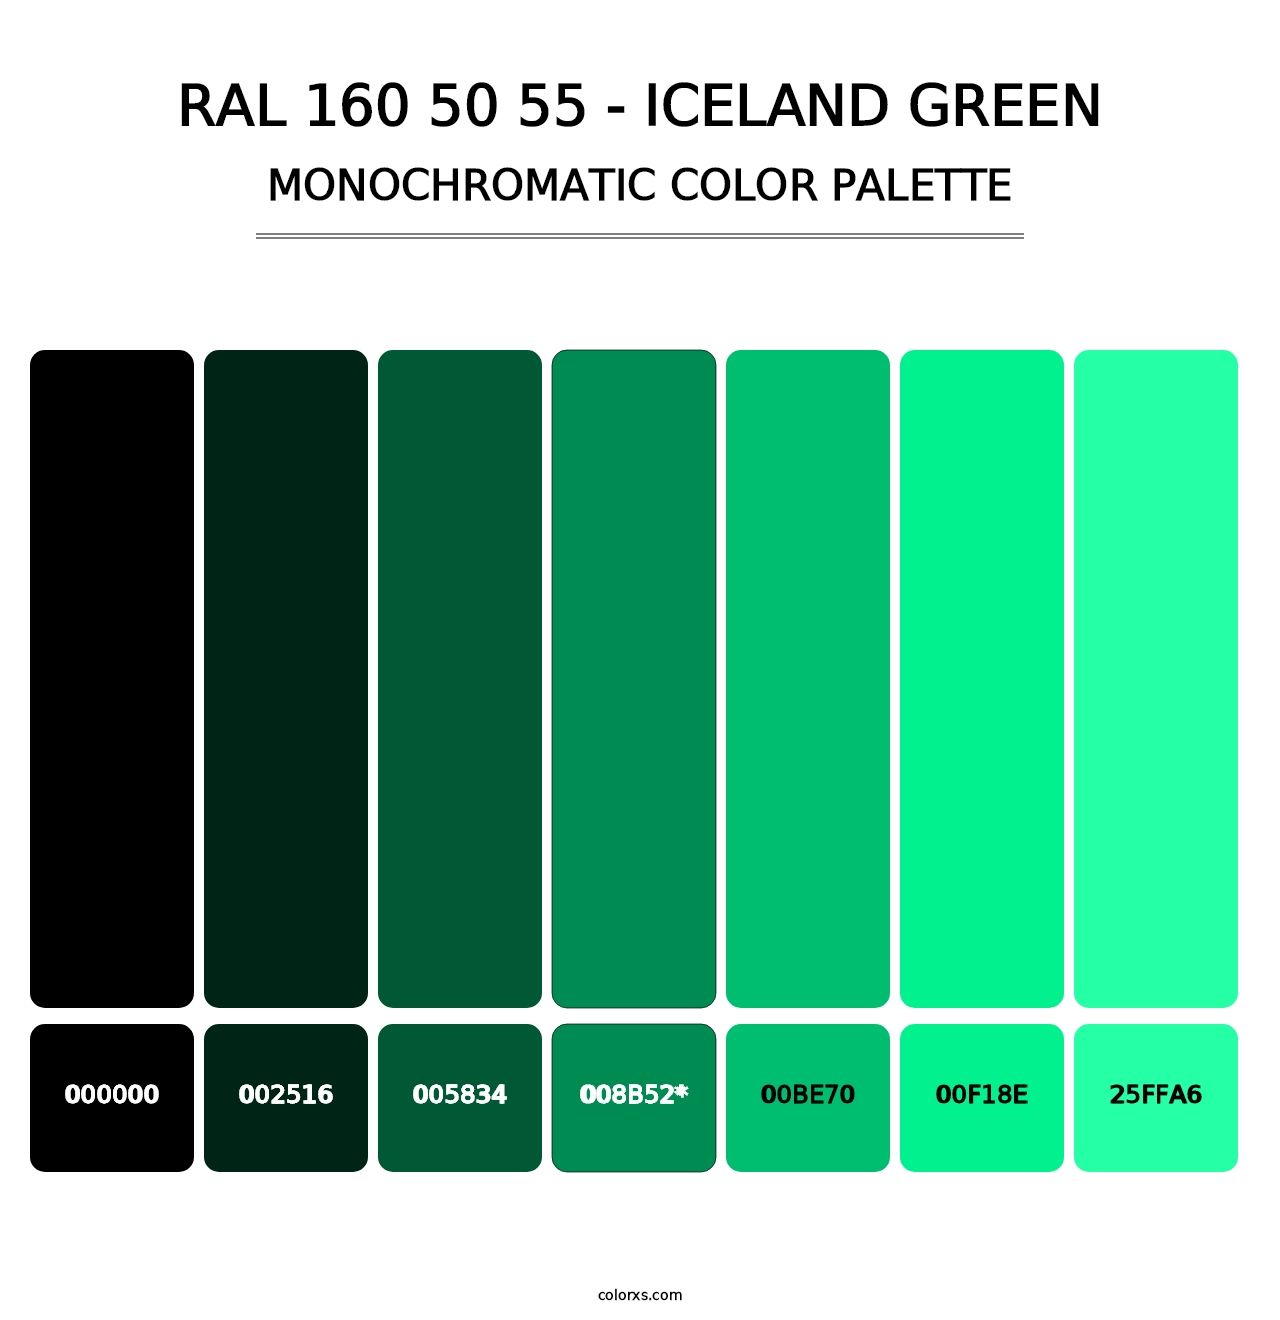 RAL 160 50 55 - Iceland Green - Monochromatic Color Palette